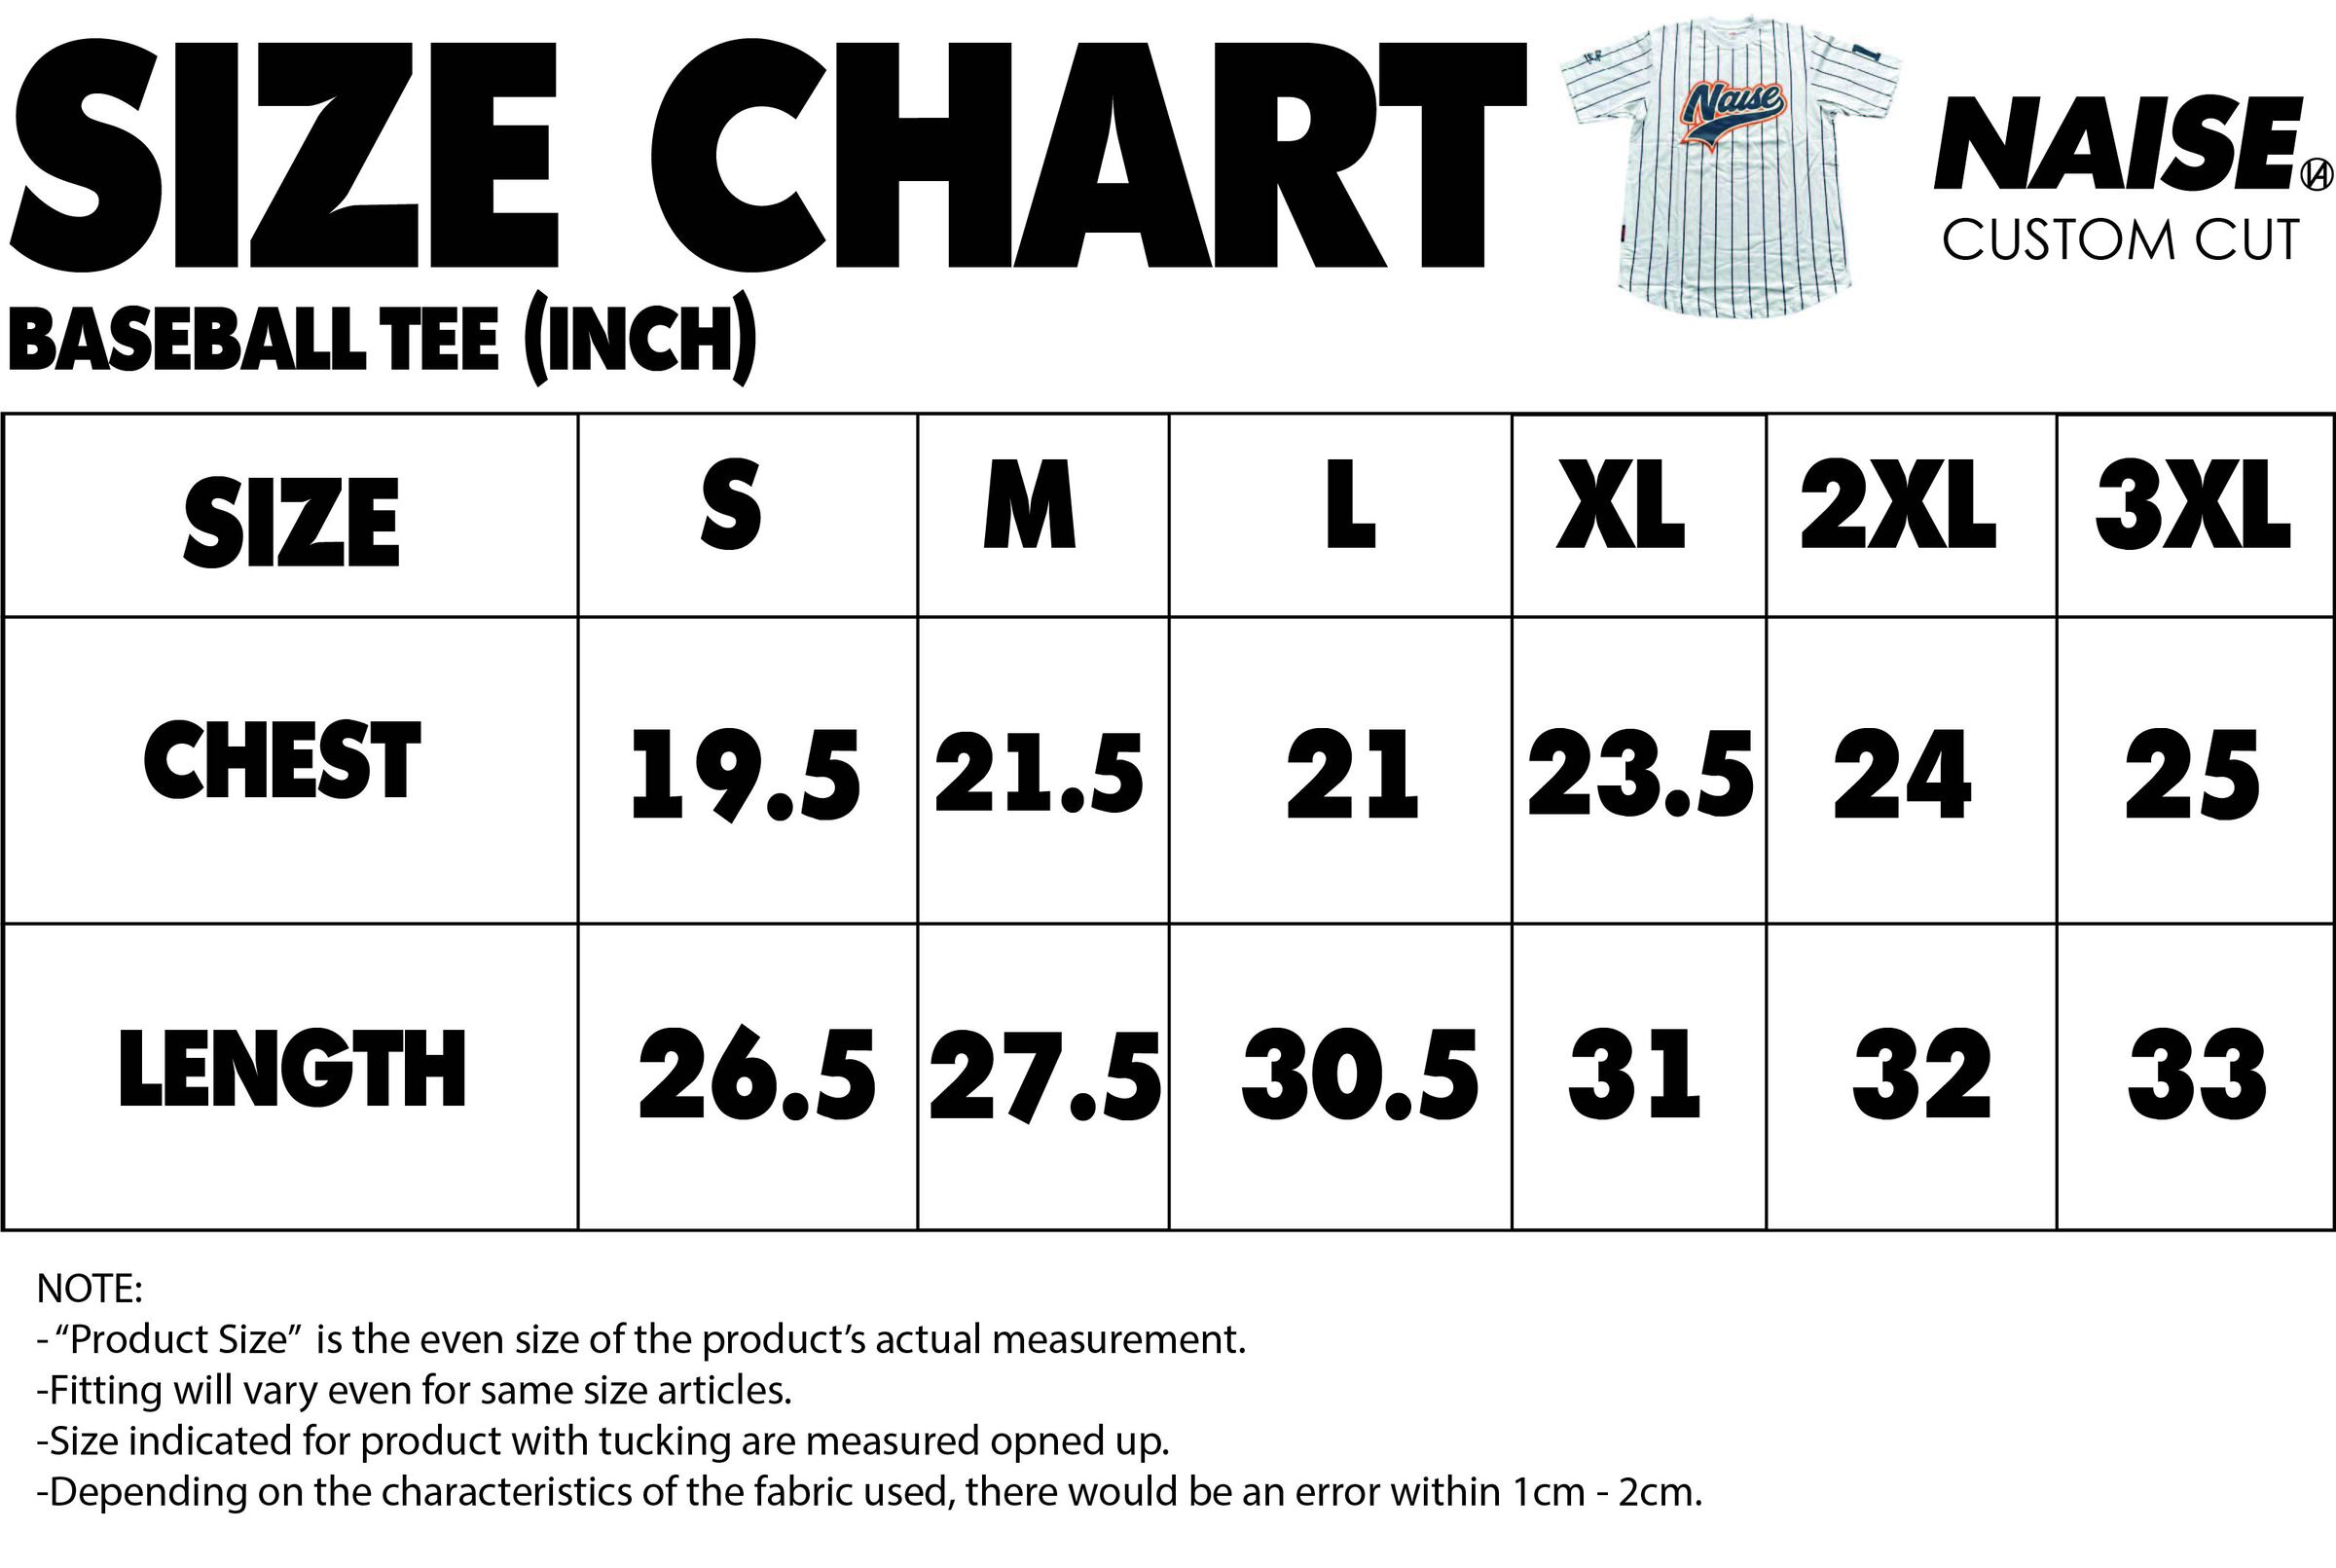 SIZE CHART BASEBALL TEE MUQRIE 2023 NOTE INCLUDED